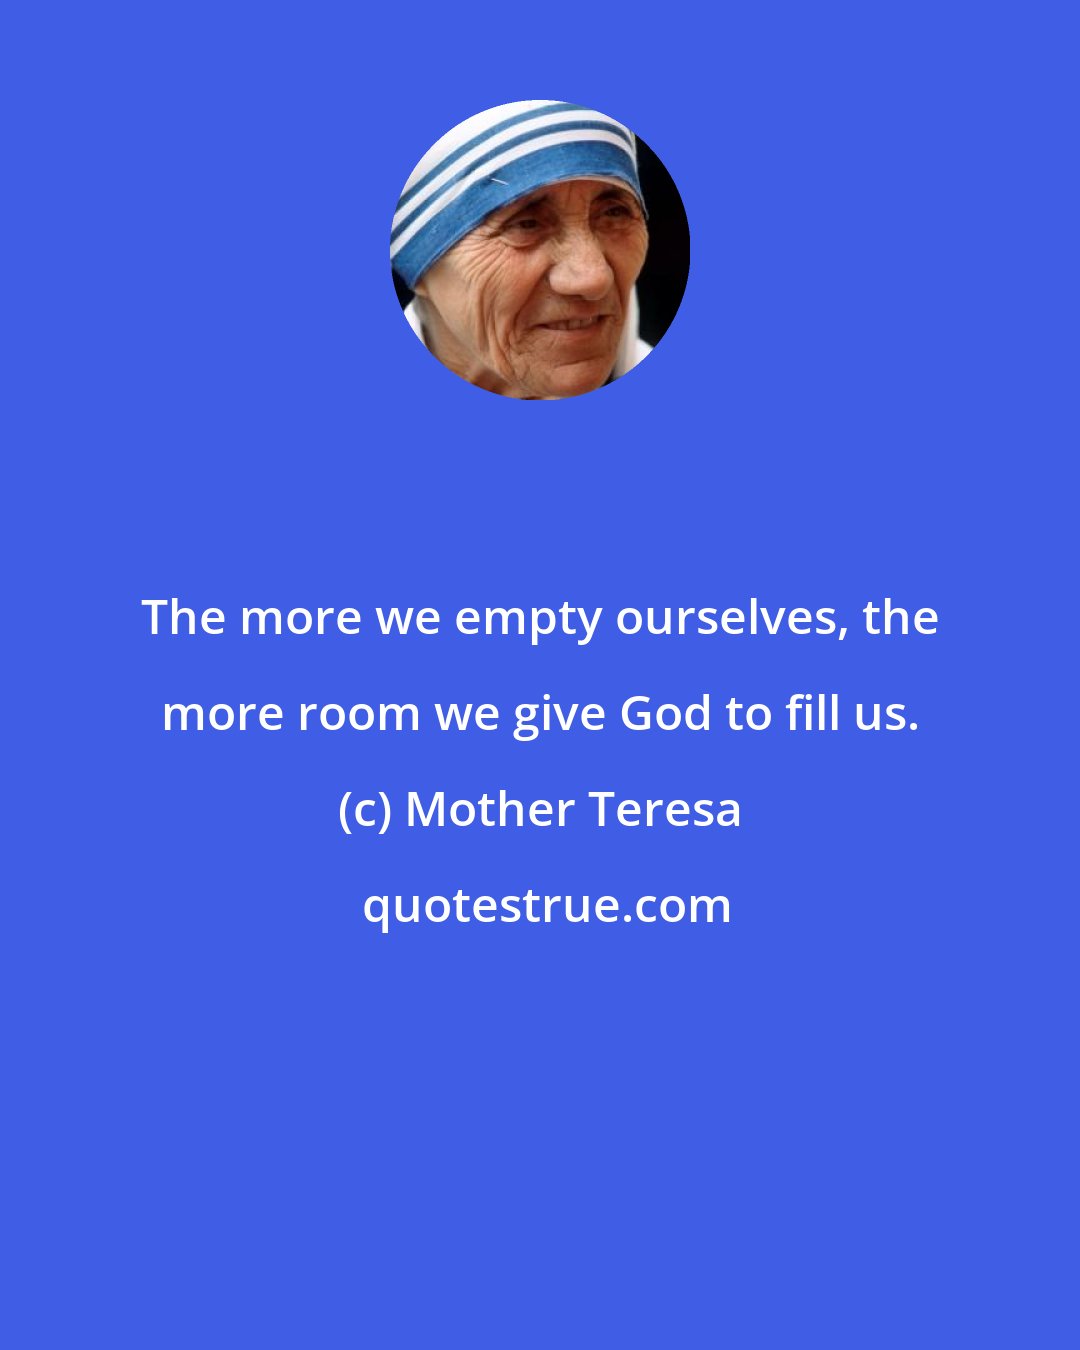 Mother Teresa: The more we empty ourselves, the more room we give God to fill us.